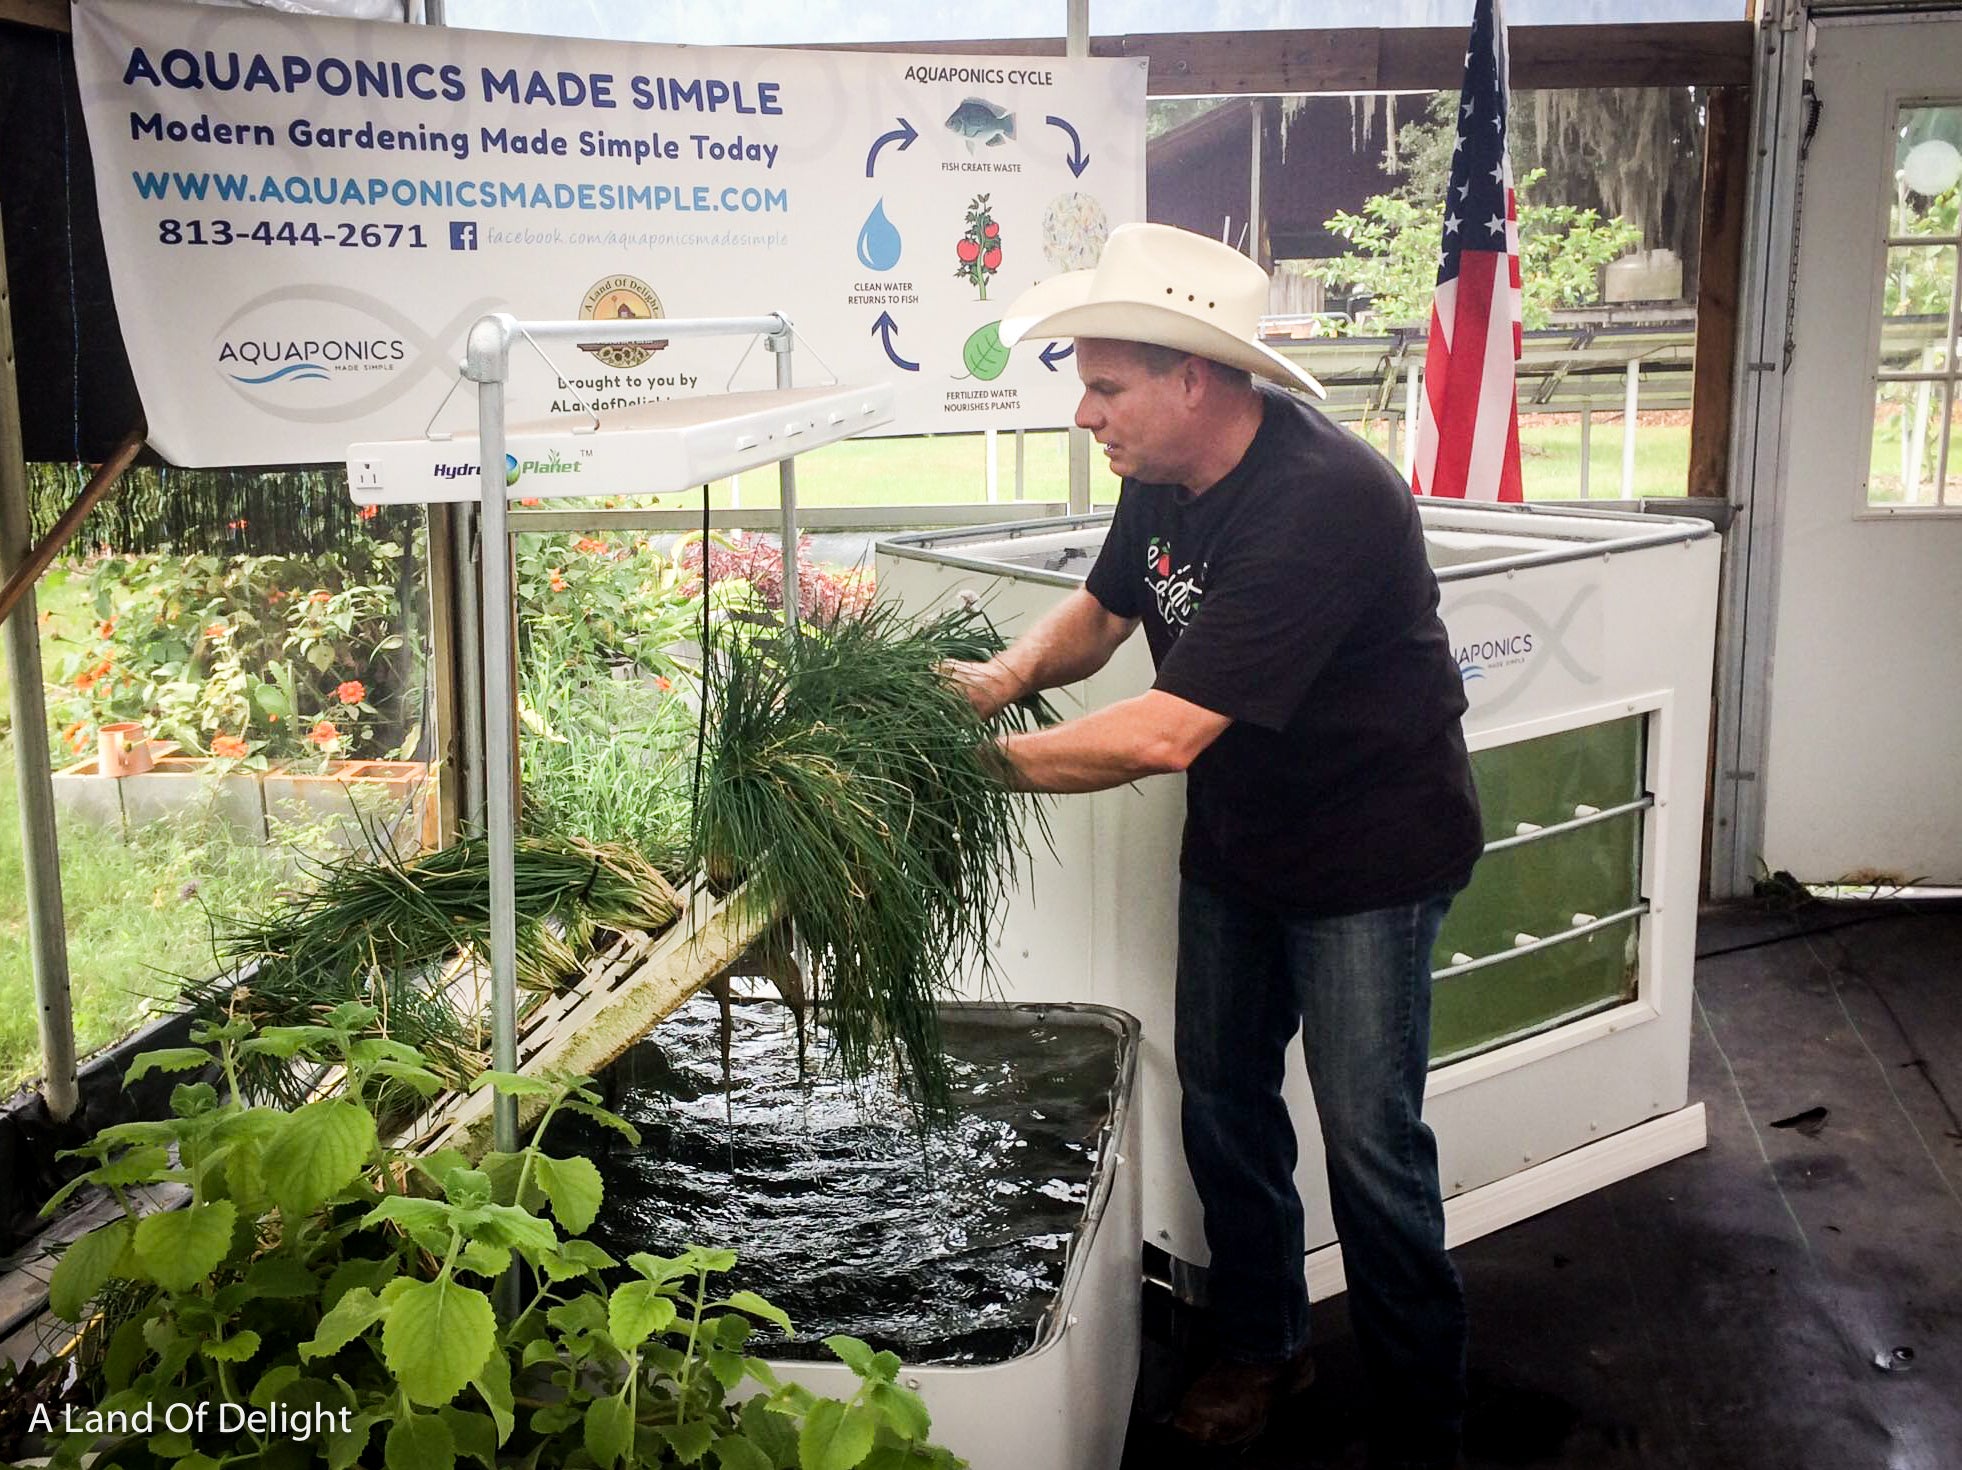 Dr. Eric Gonyon giving Aquaponics Garden System Class, showing plants grown in aquaponics system